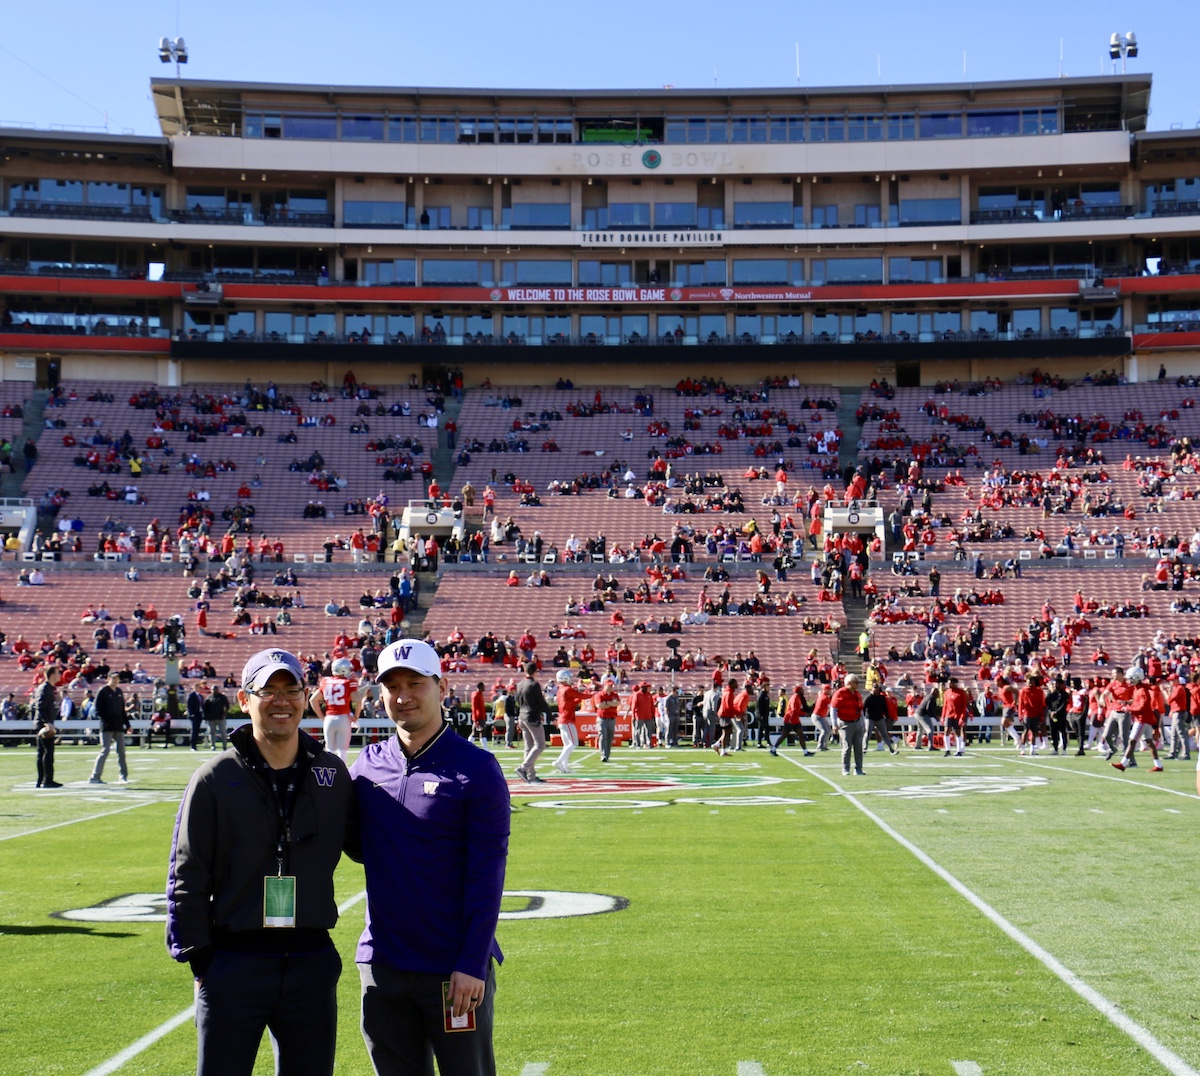 Dr. Gee and Dr. Kweon at the Rose Bowl